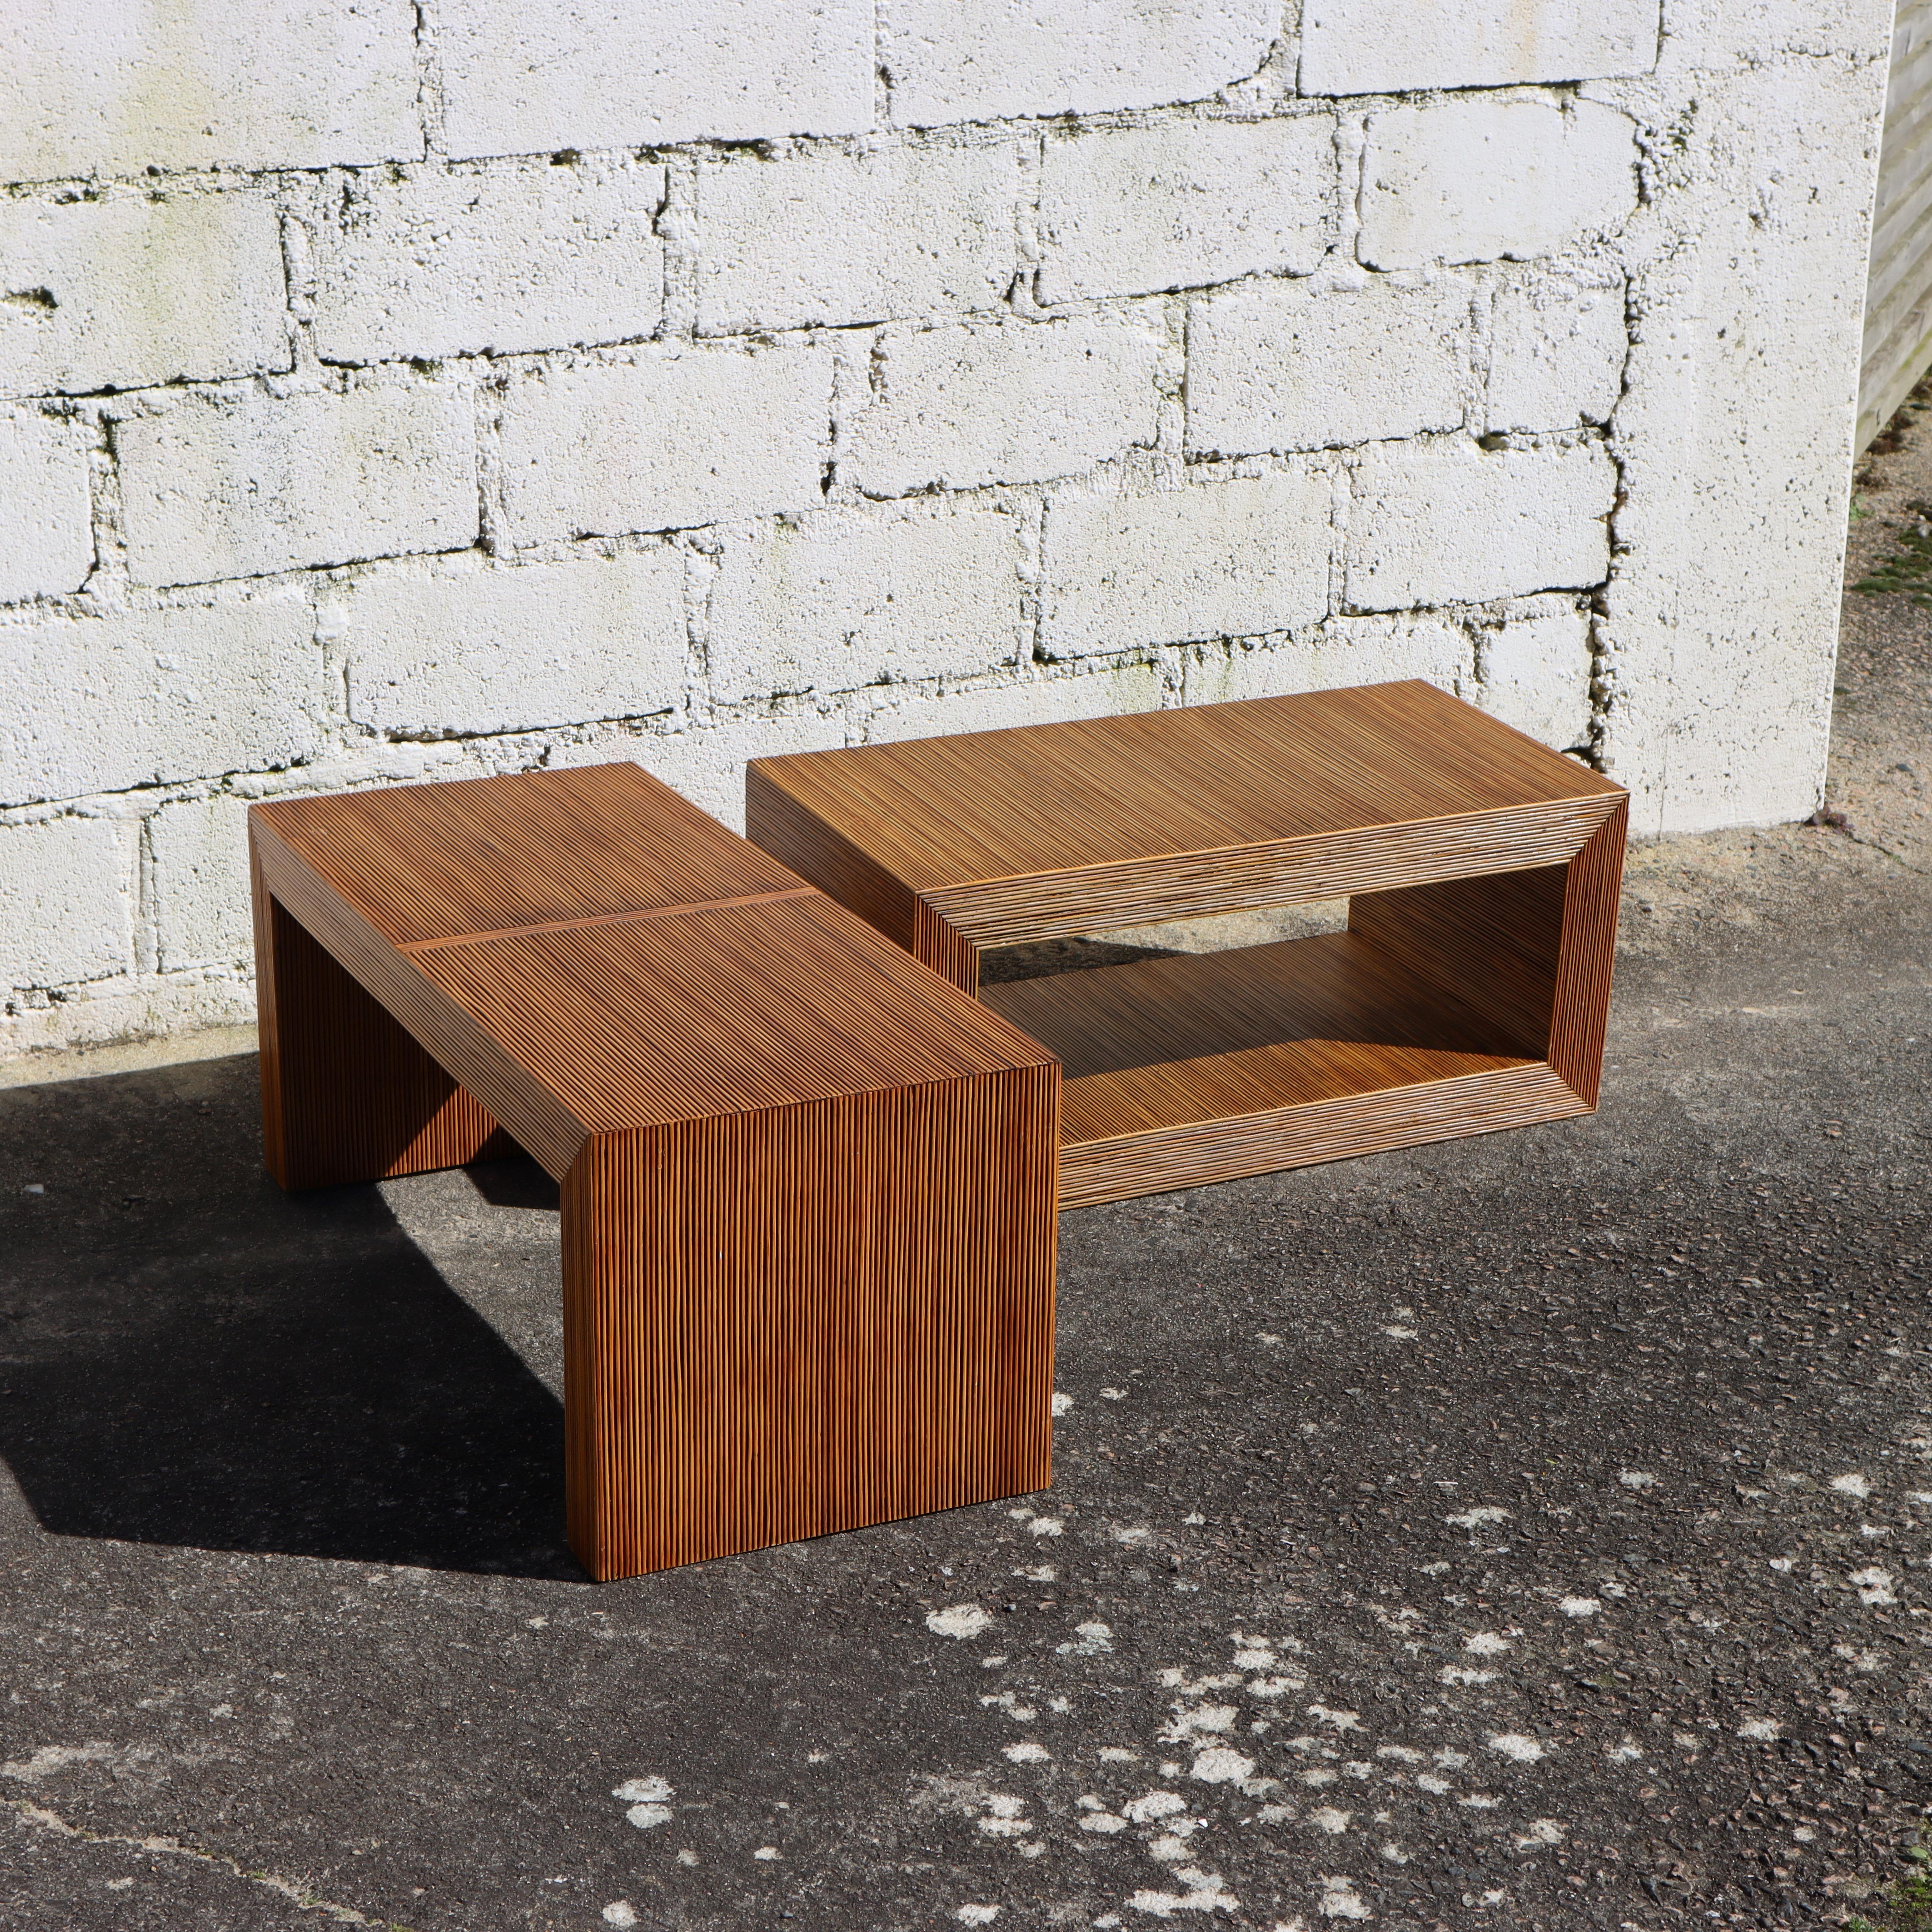 Laminated 2 Vintage Rattan Coffee Tables-Cuboid Lounge Tables-Set Patio Deck Tables-80s For Sale